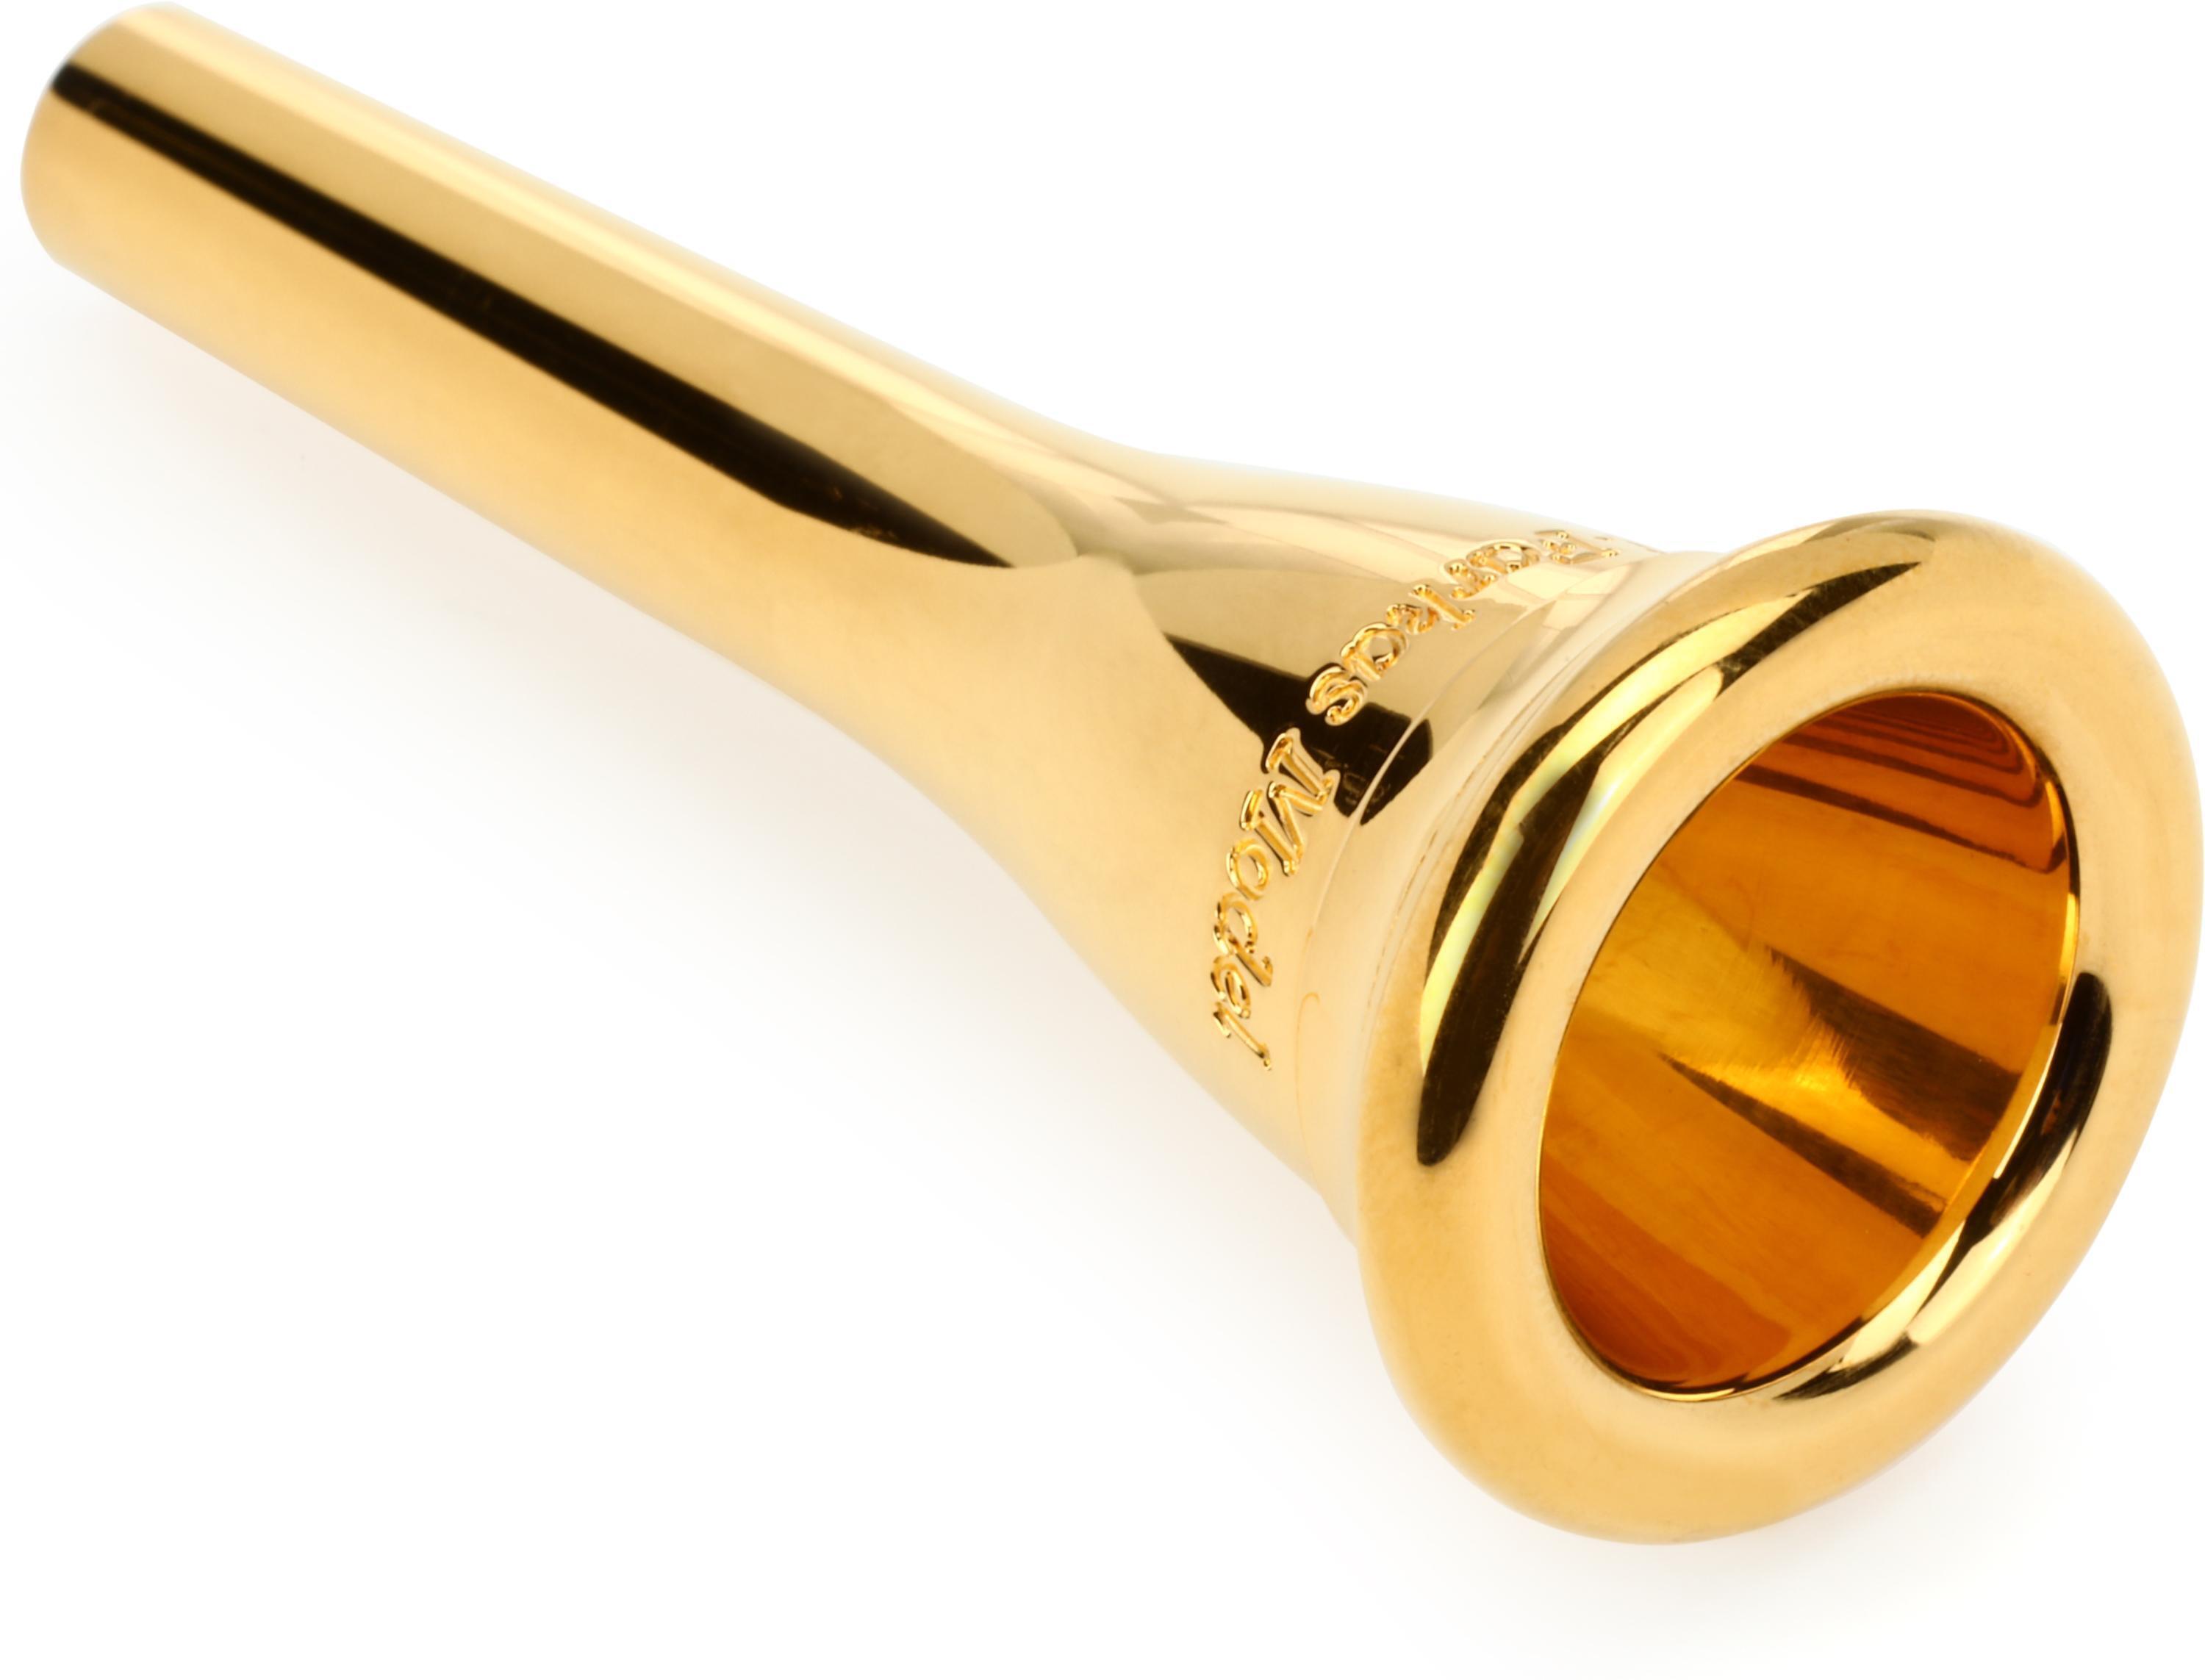 Holton Farkas Gold-Plated French Horn Mouthpiece - MC | Sweetwater